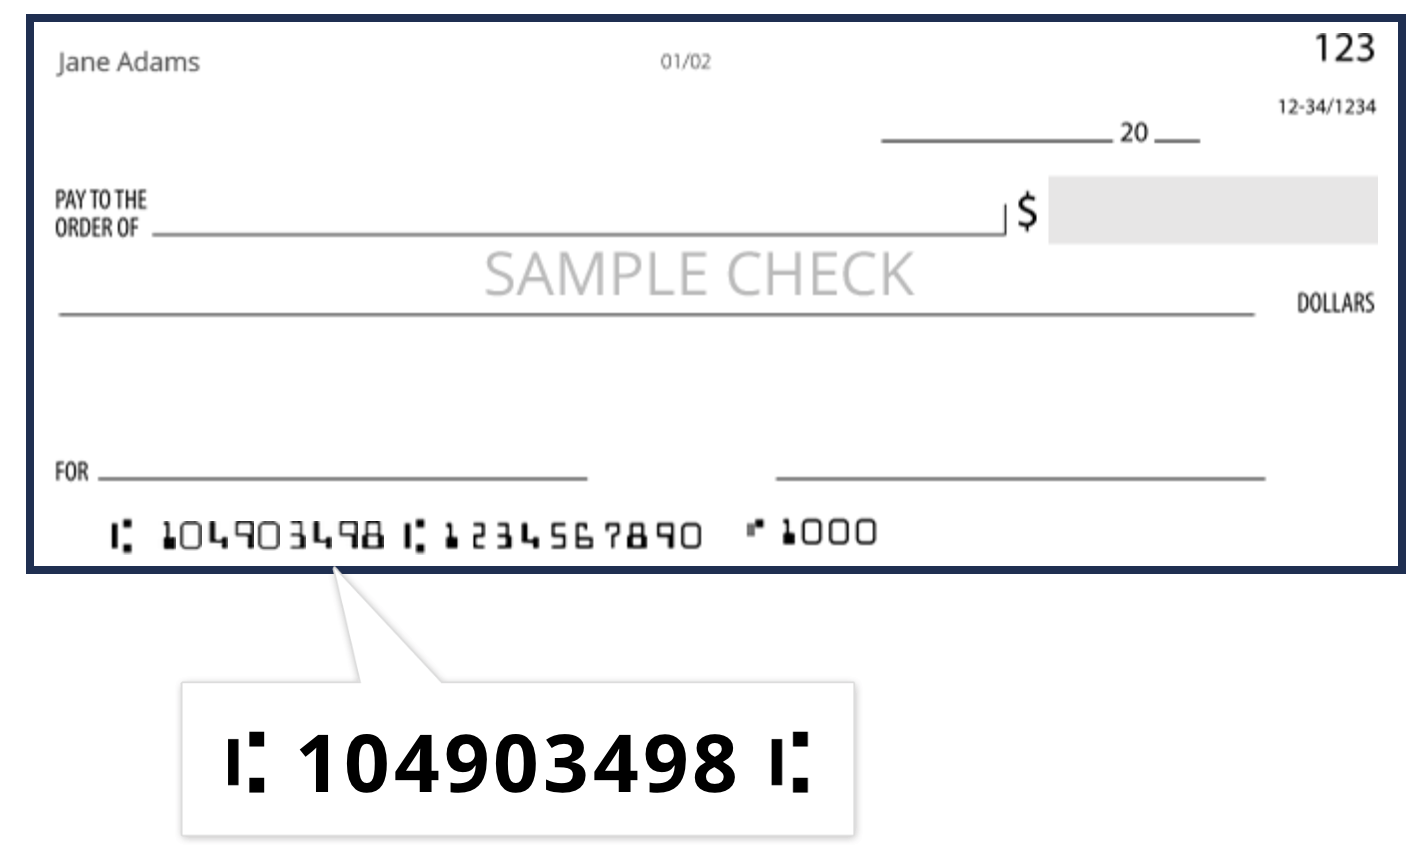 sample check showing routing number: 104903498